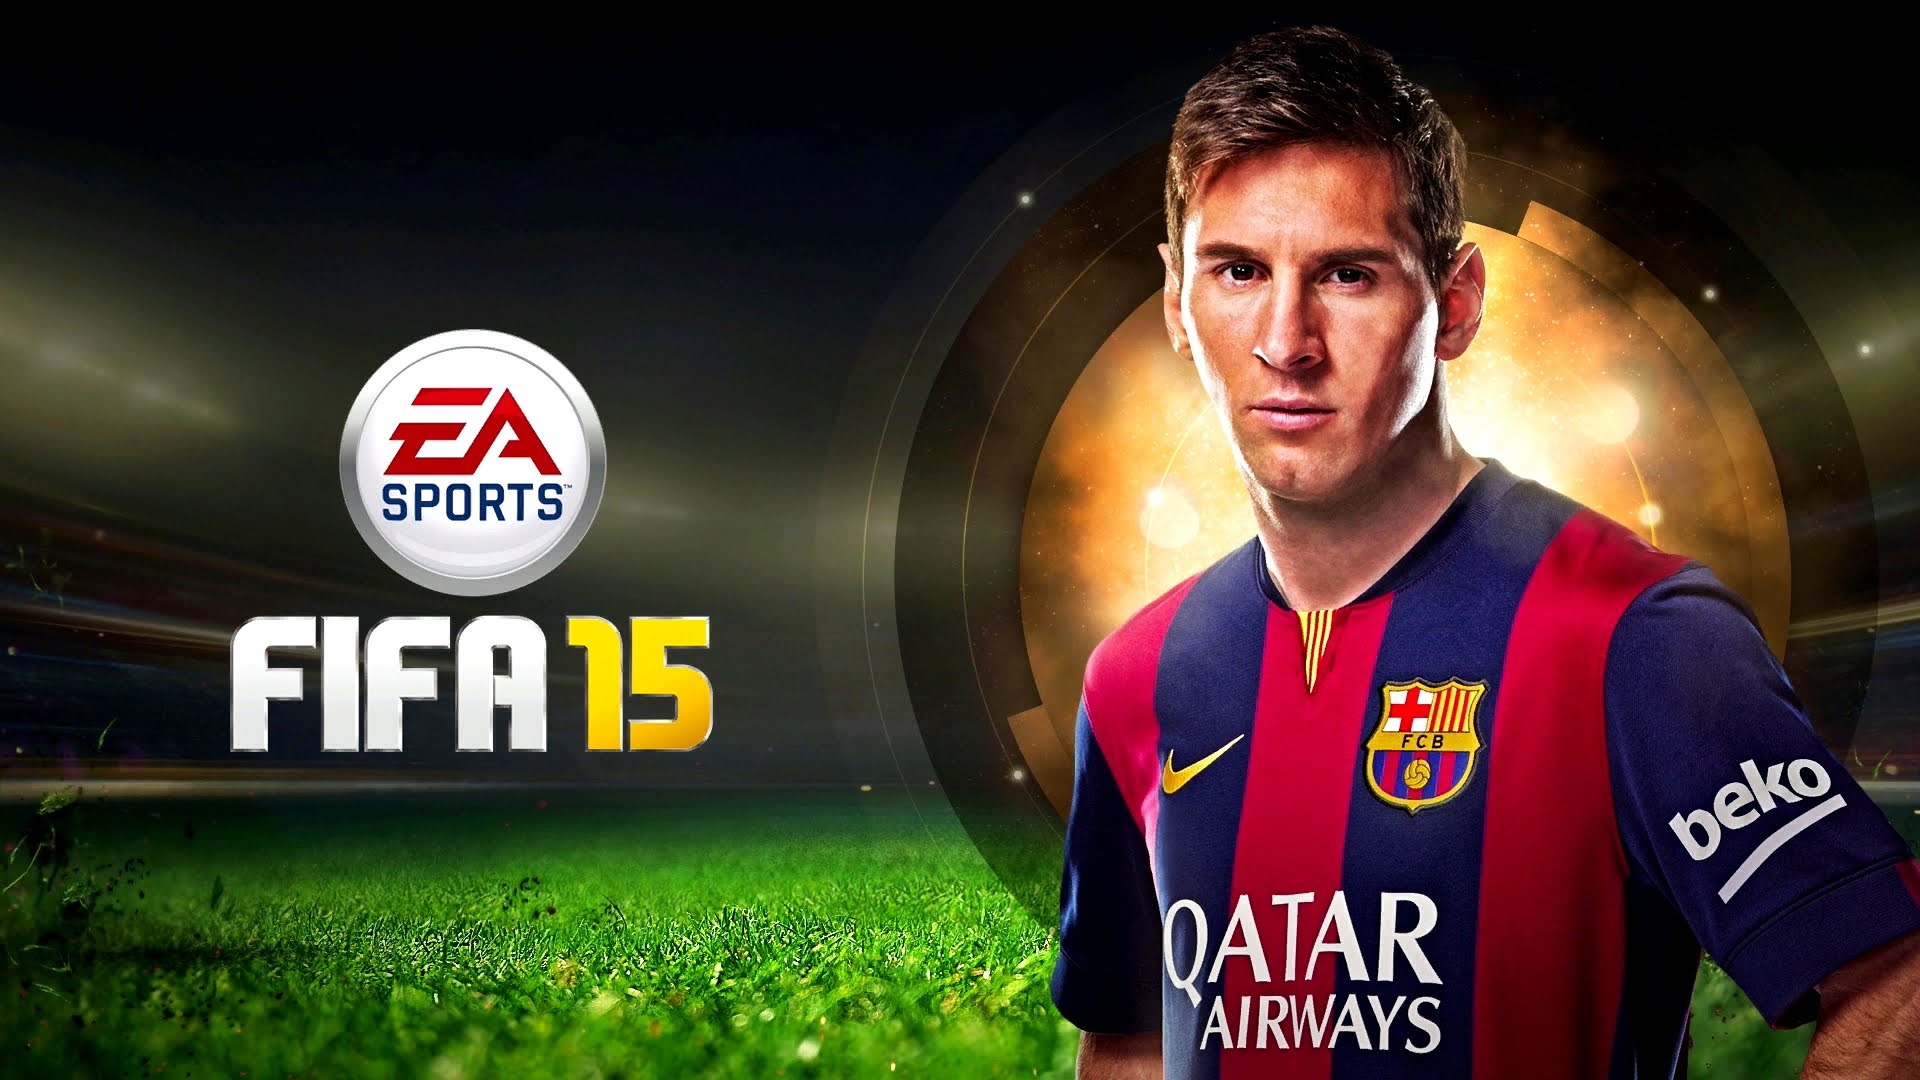 Fifa 14 For Mac Free Download